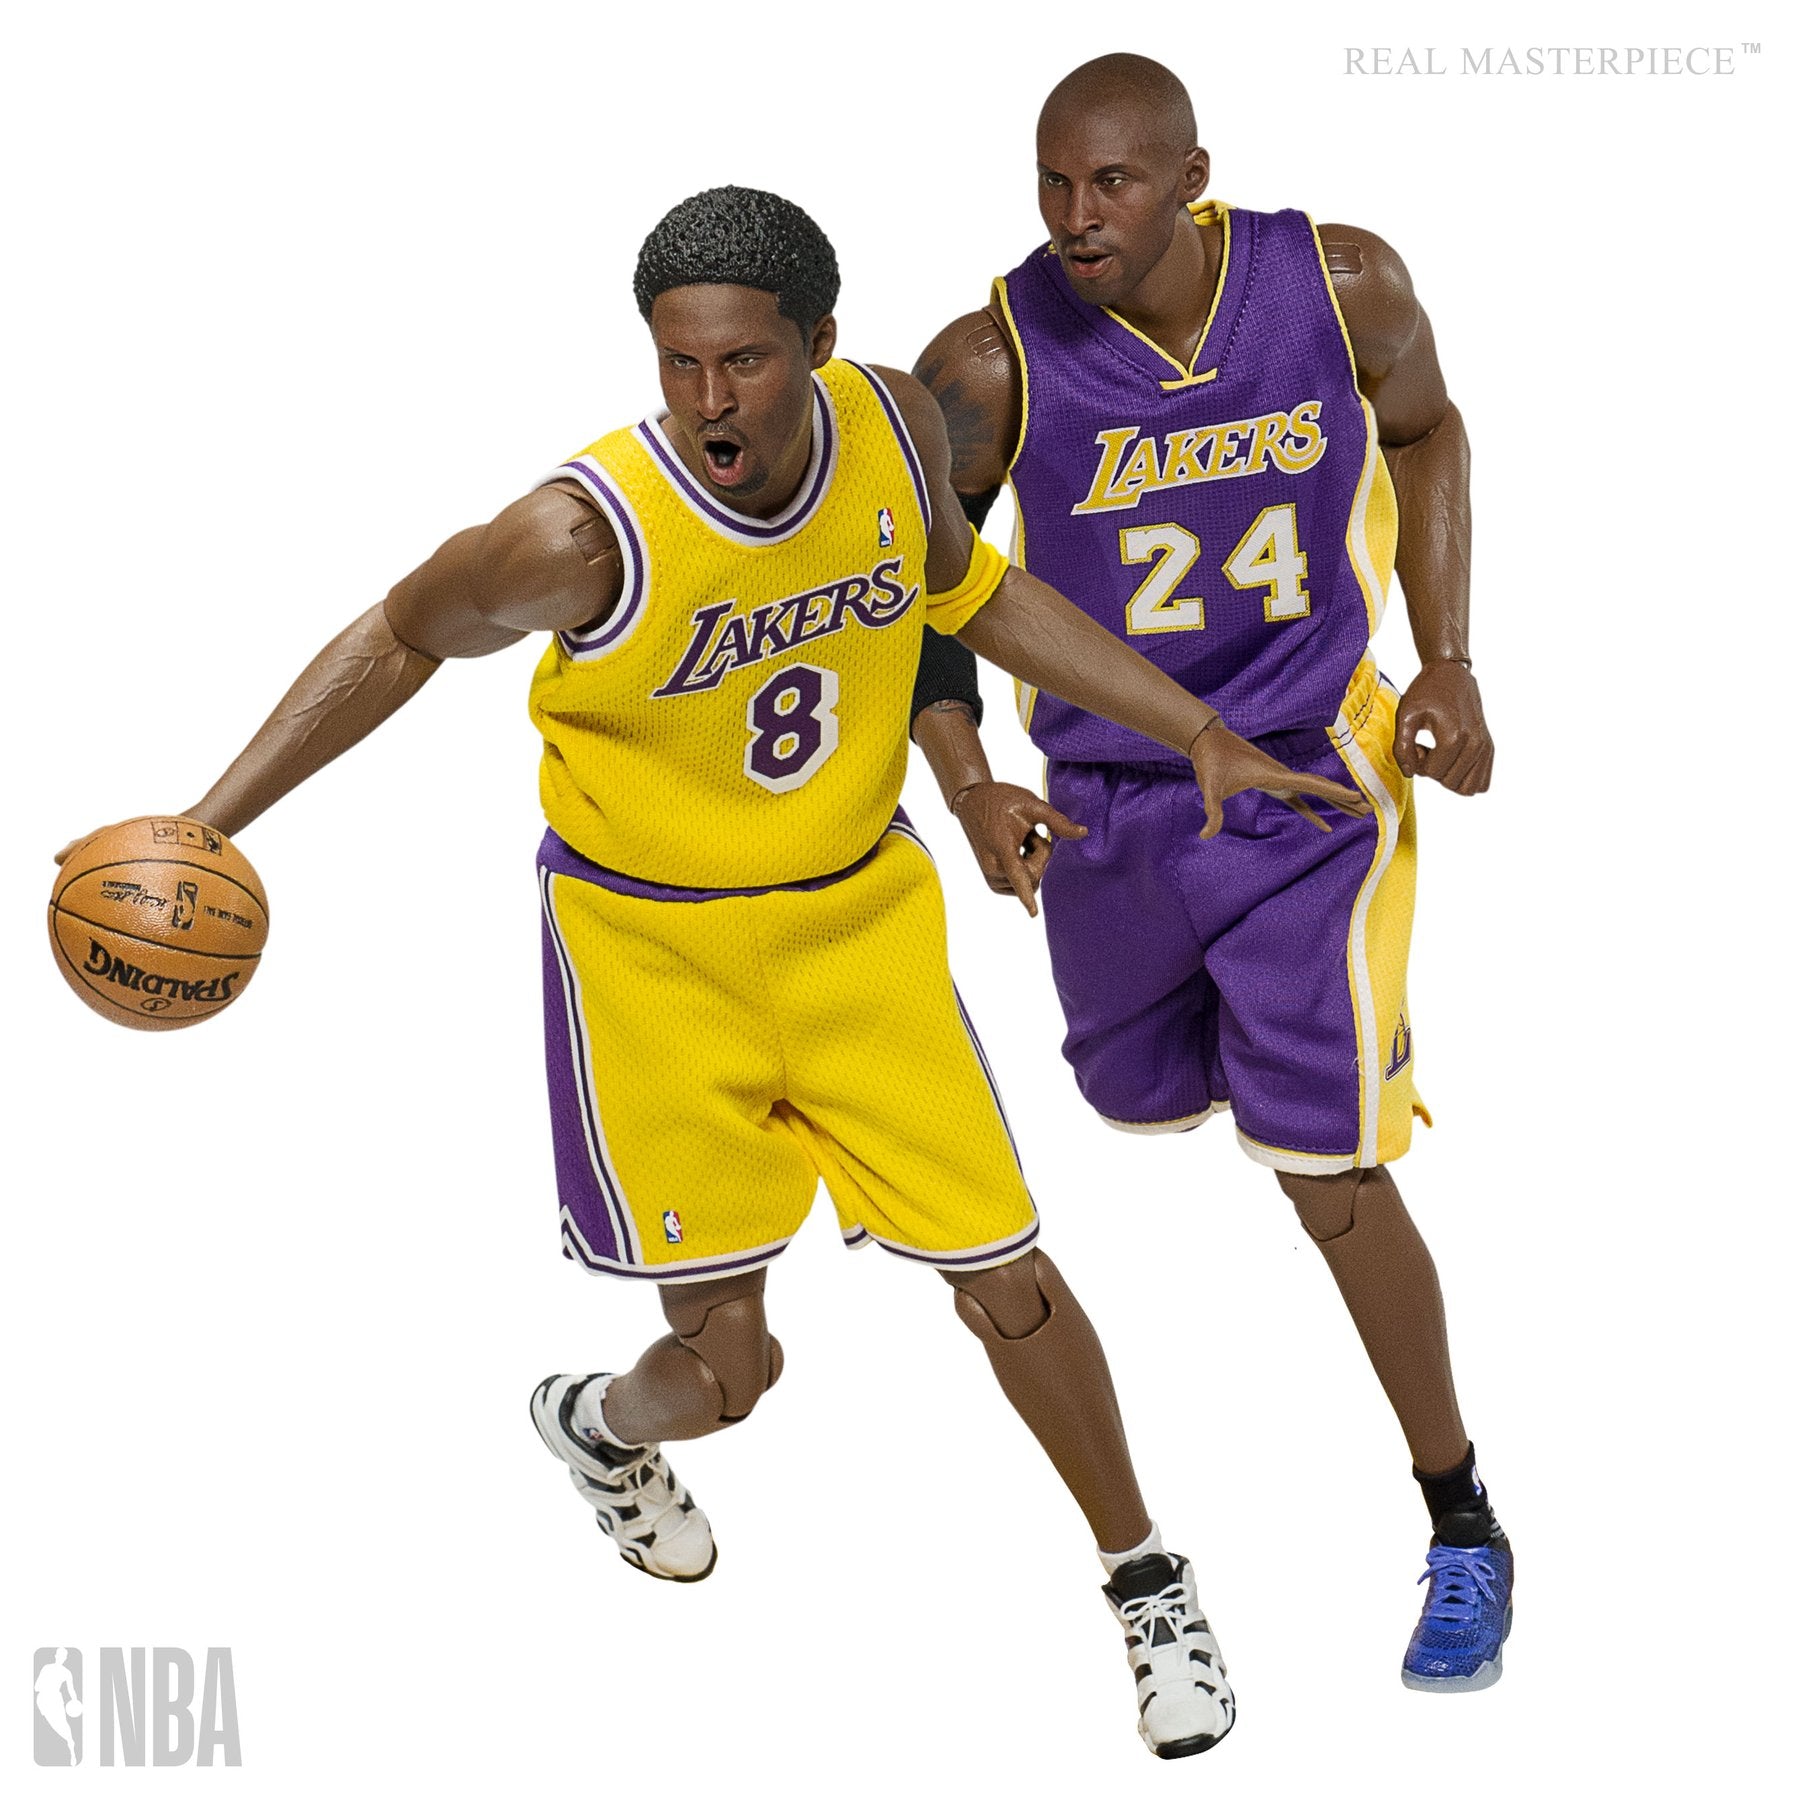 Enterbay - Real Masterpiece - NBA Collection - Kobe Bryant (New Upgraded Re-Edition) (1/6 Scale)